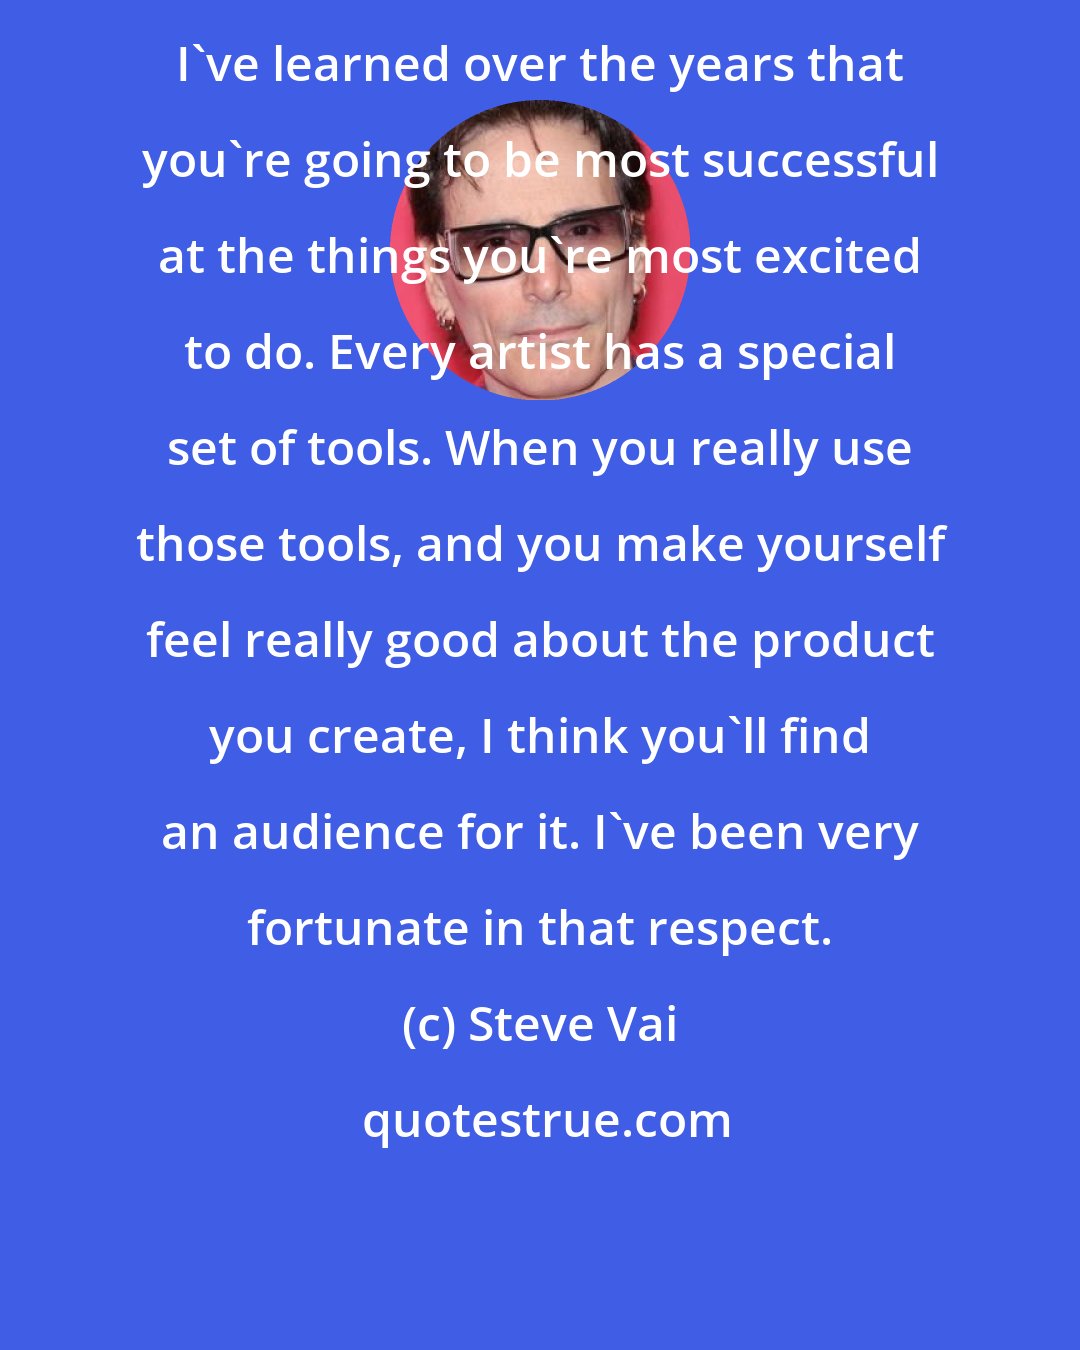 Steve Vai: I've learned over the years that you're going to be most successful at the things you're most excited to do. Every artist has a special set of tools. When you really use those tools, and you make yourself feel really good about the product you create, I think you'll find an audience for it. I've been very fortunate in that respect.